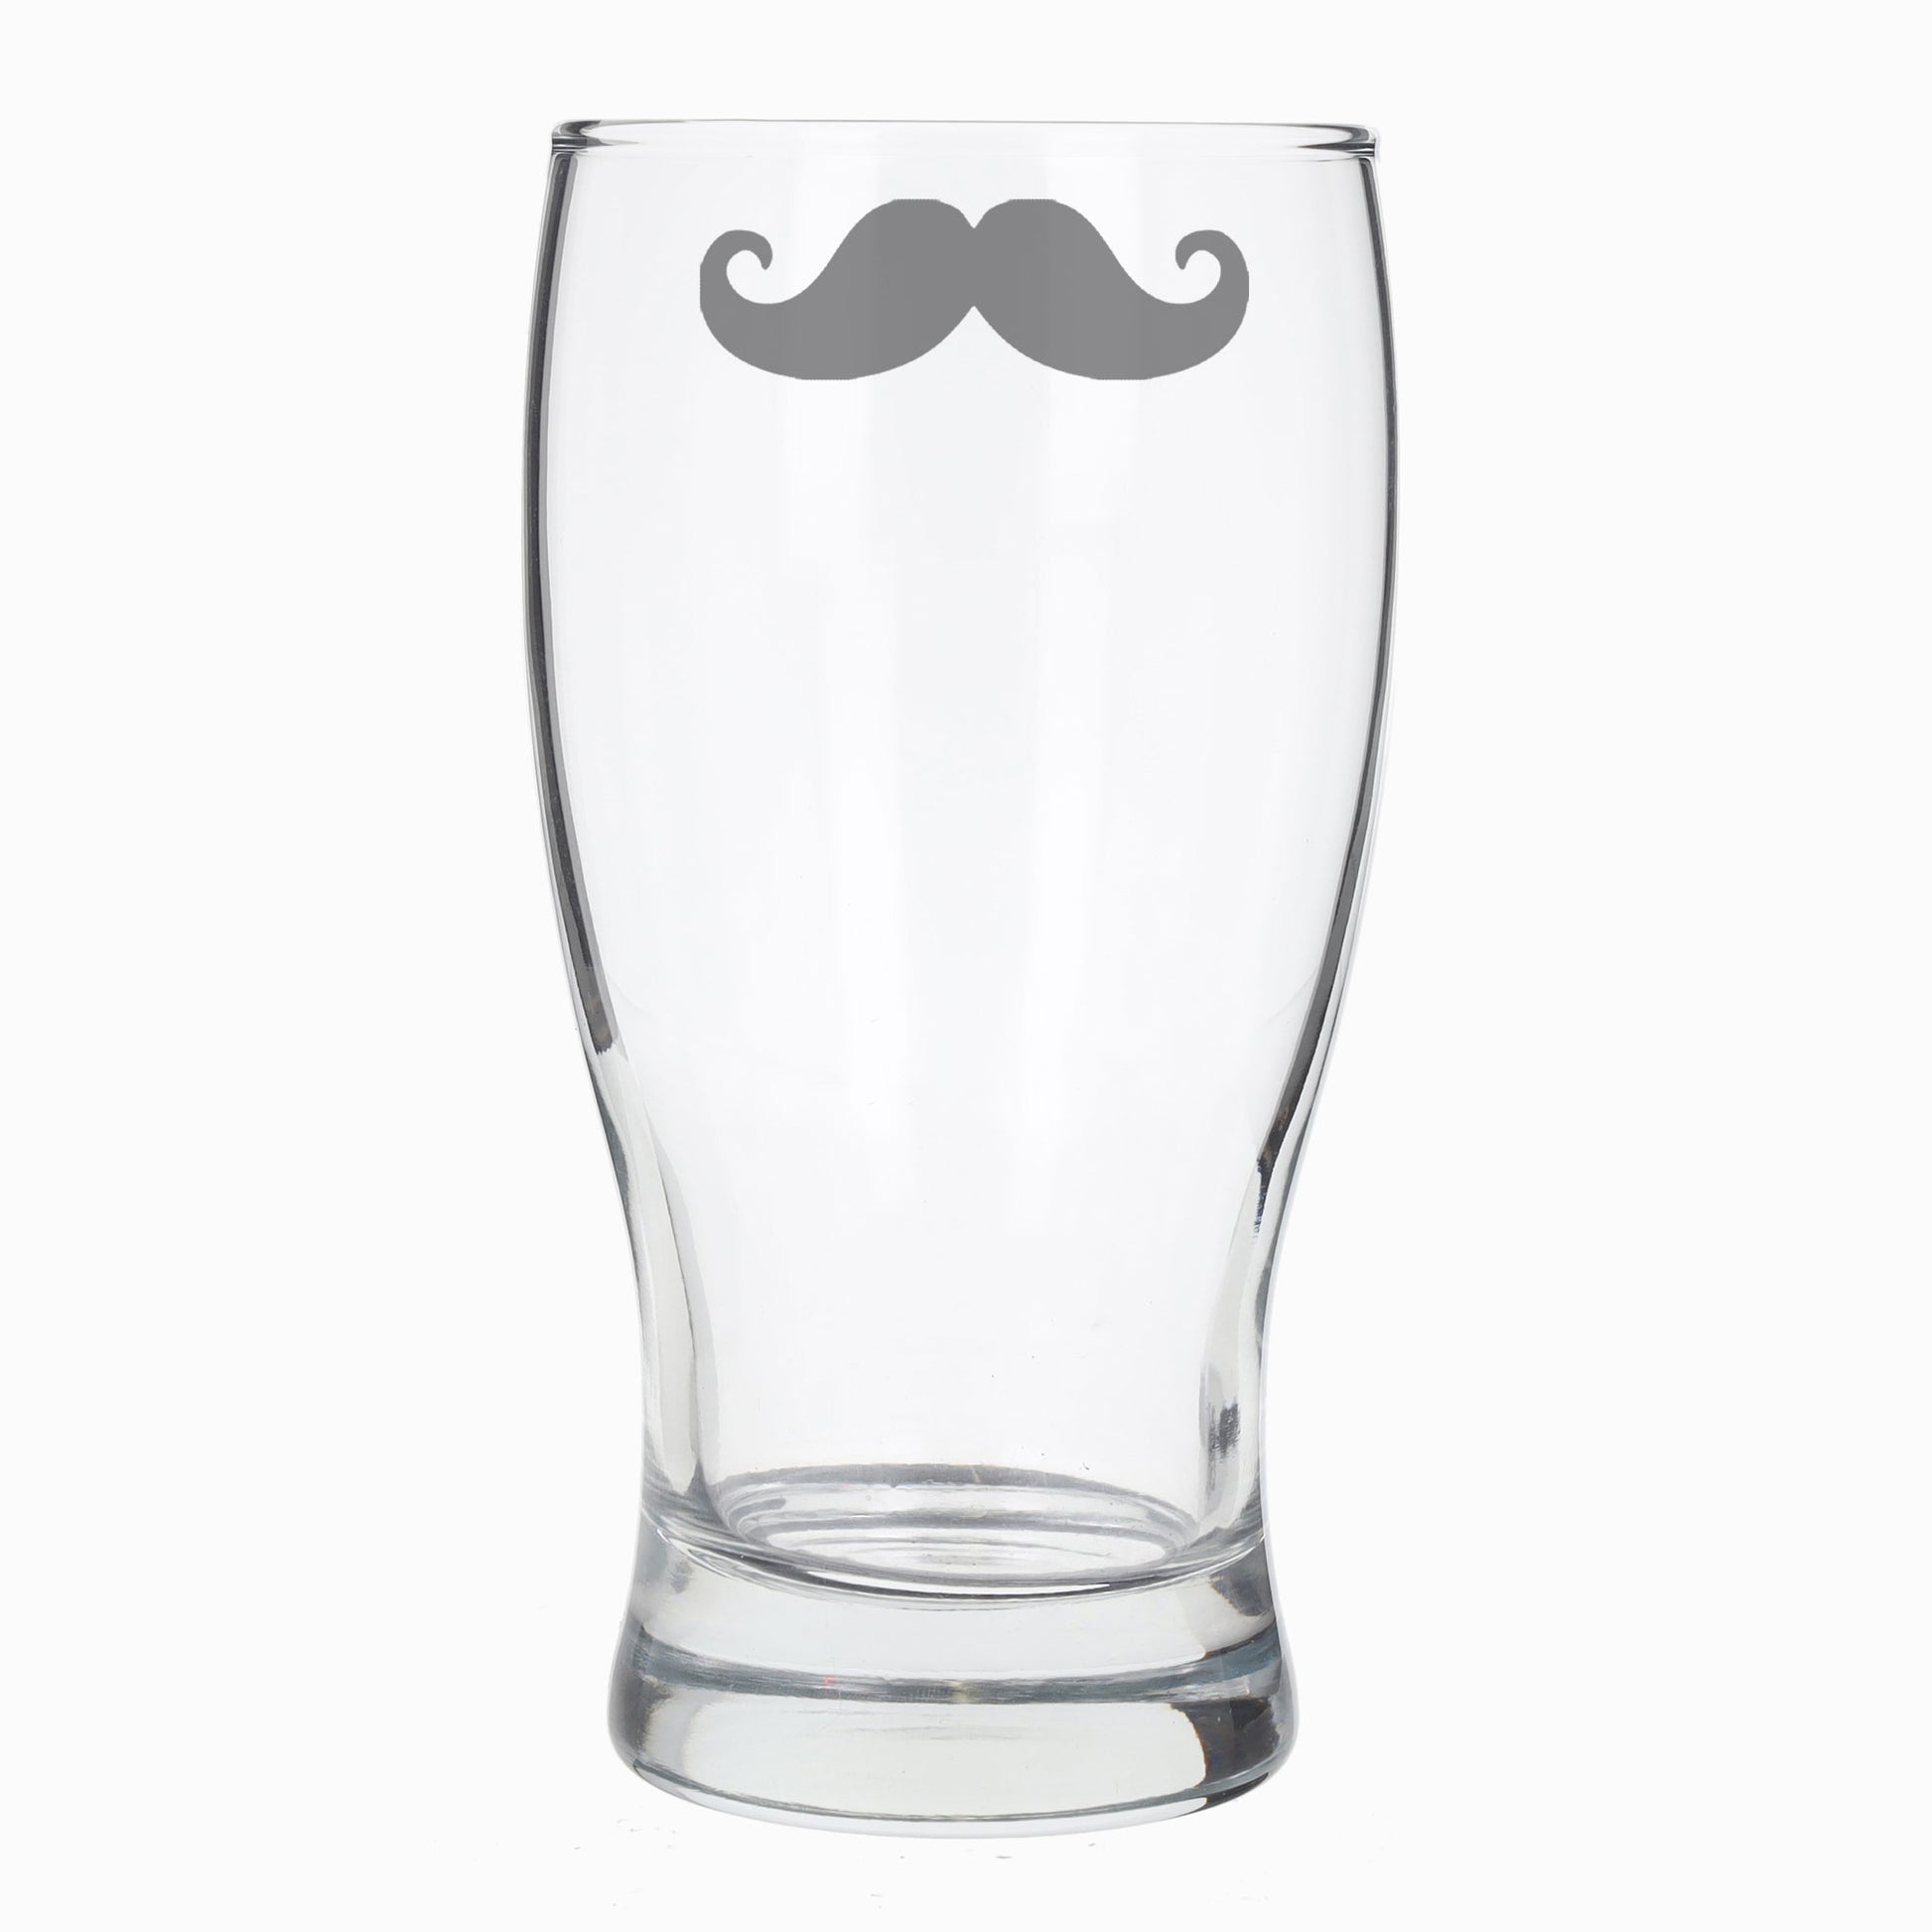 Moustache Engraved Beer Pint Glass and/or Coaster Set  - Always Looking Good - Beer Glass Only  